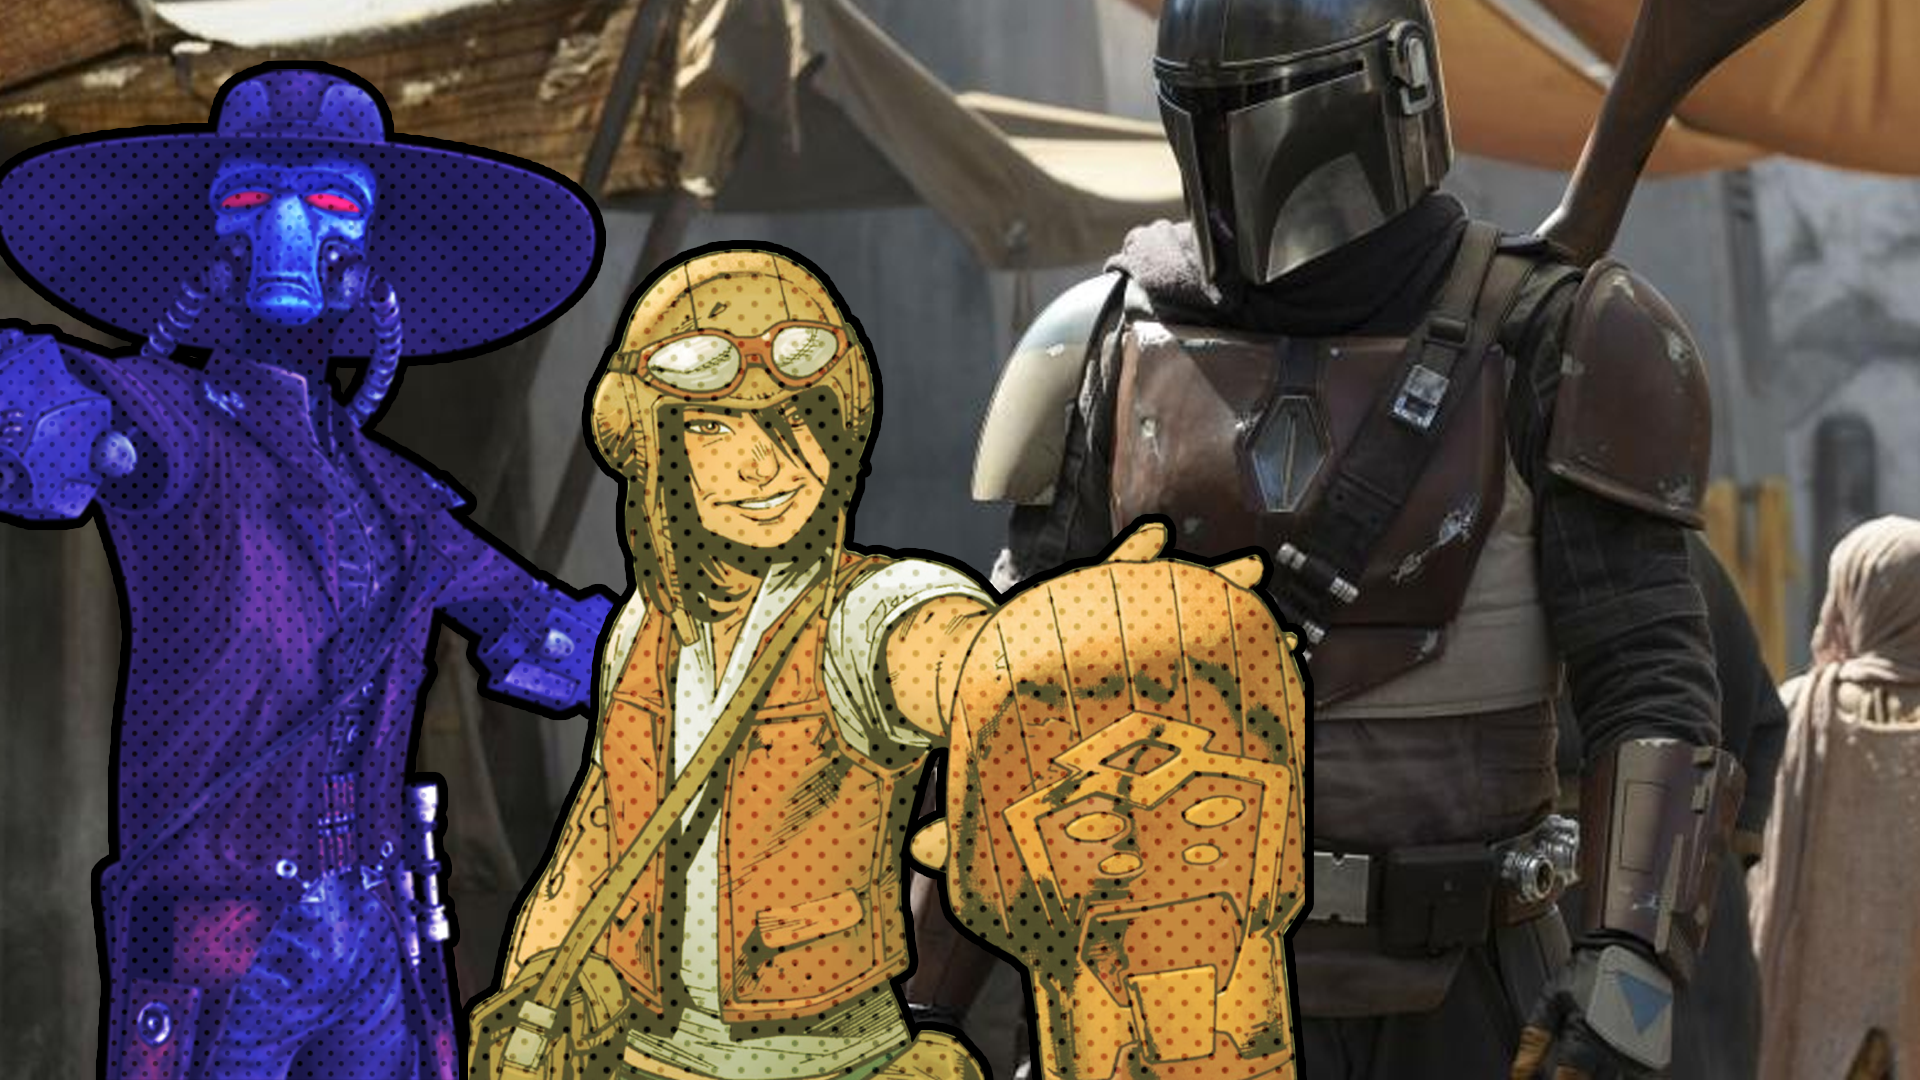 Other Star Wars Stuff You Should Check Out If You Like The Mandalorian